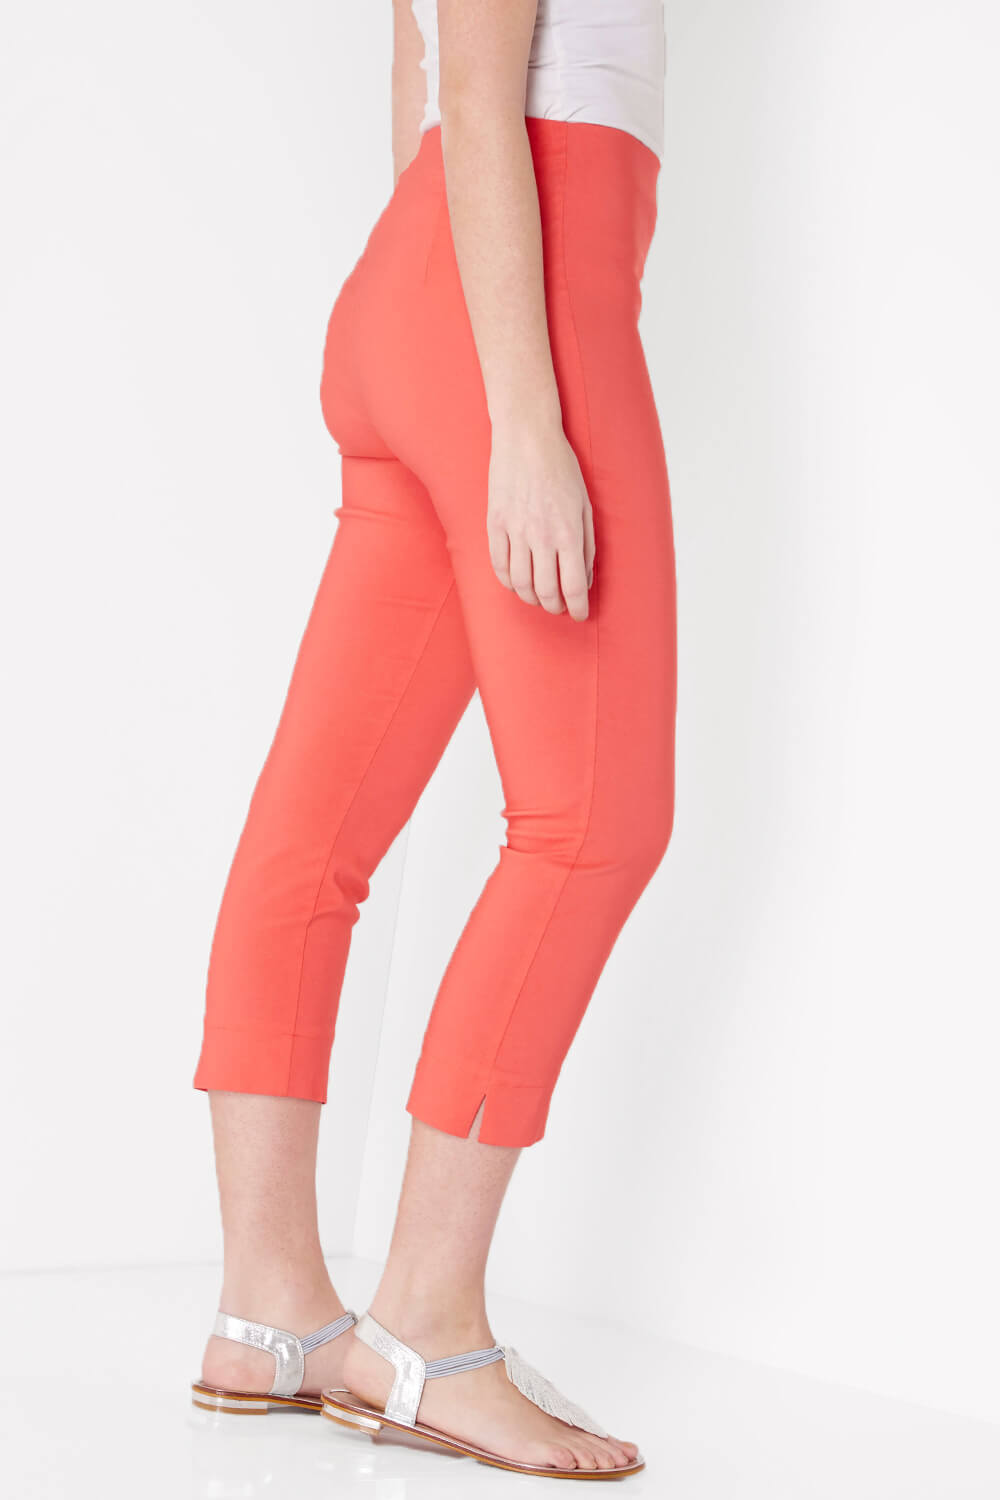 CORAL Cropped Stretch Trouser, Image 3 of 5